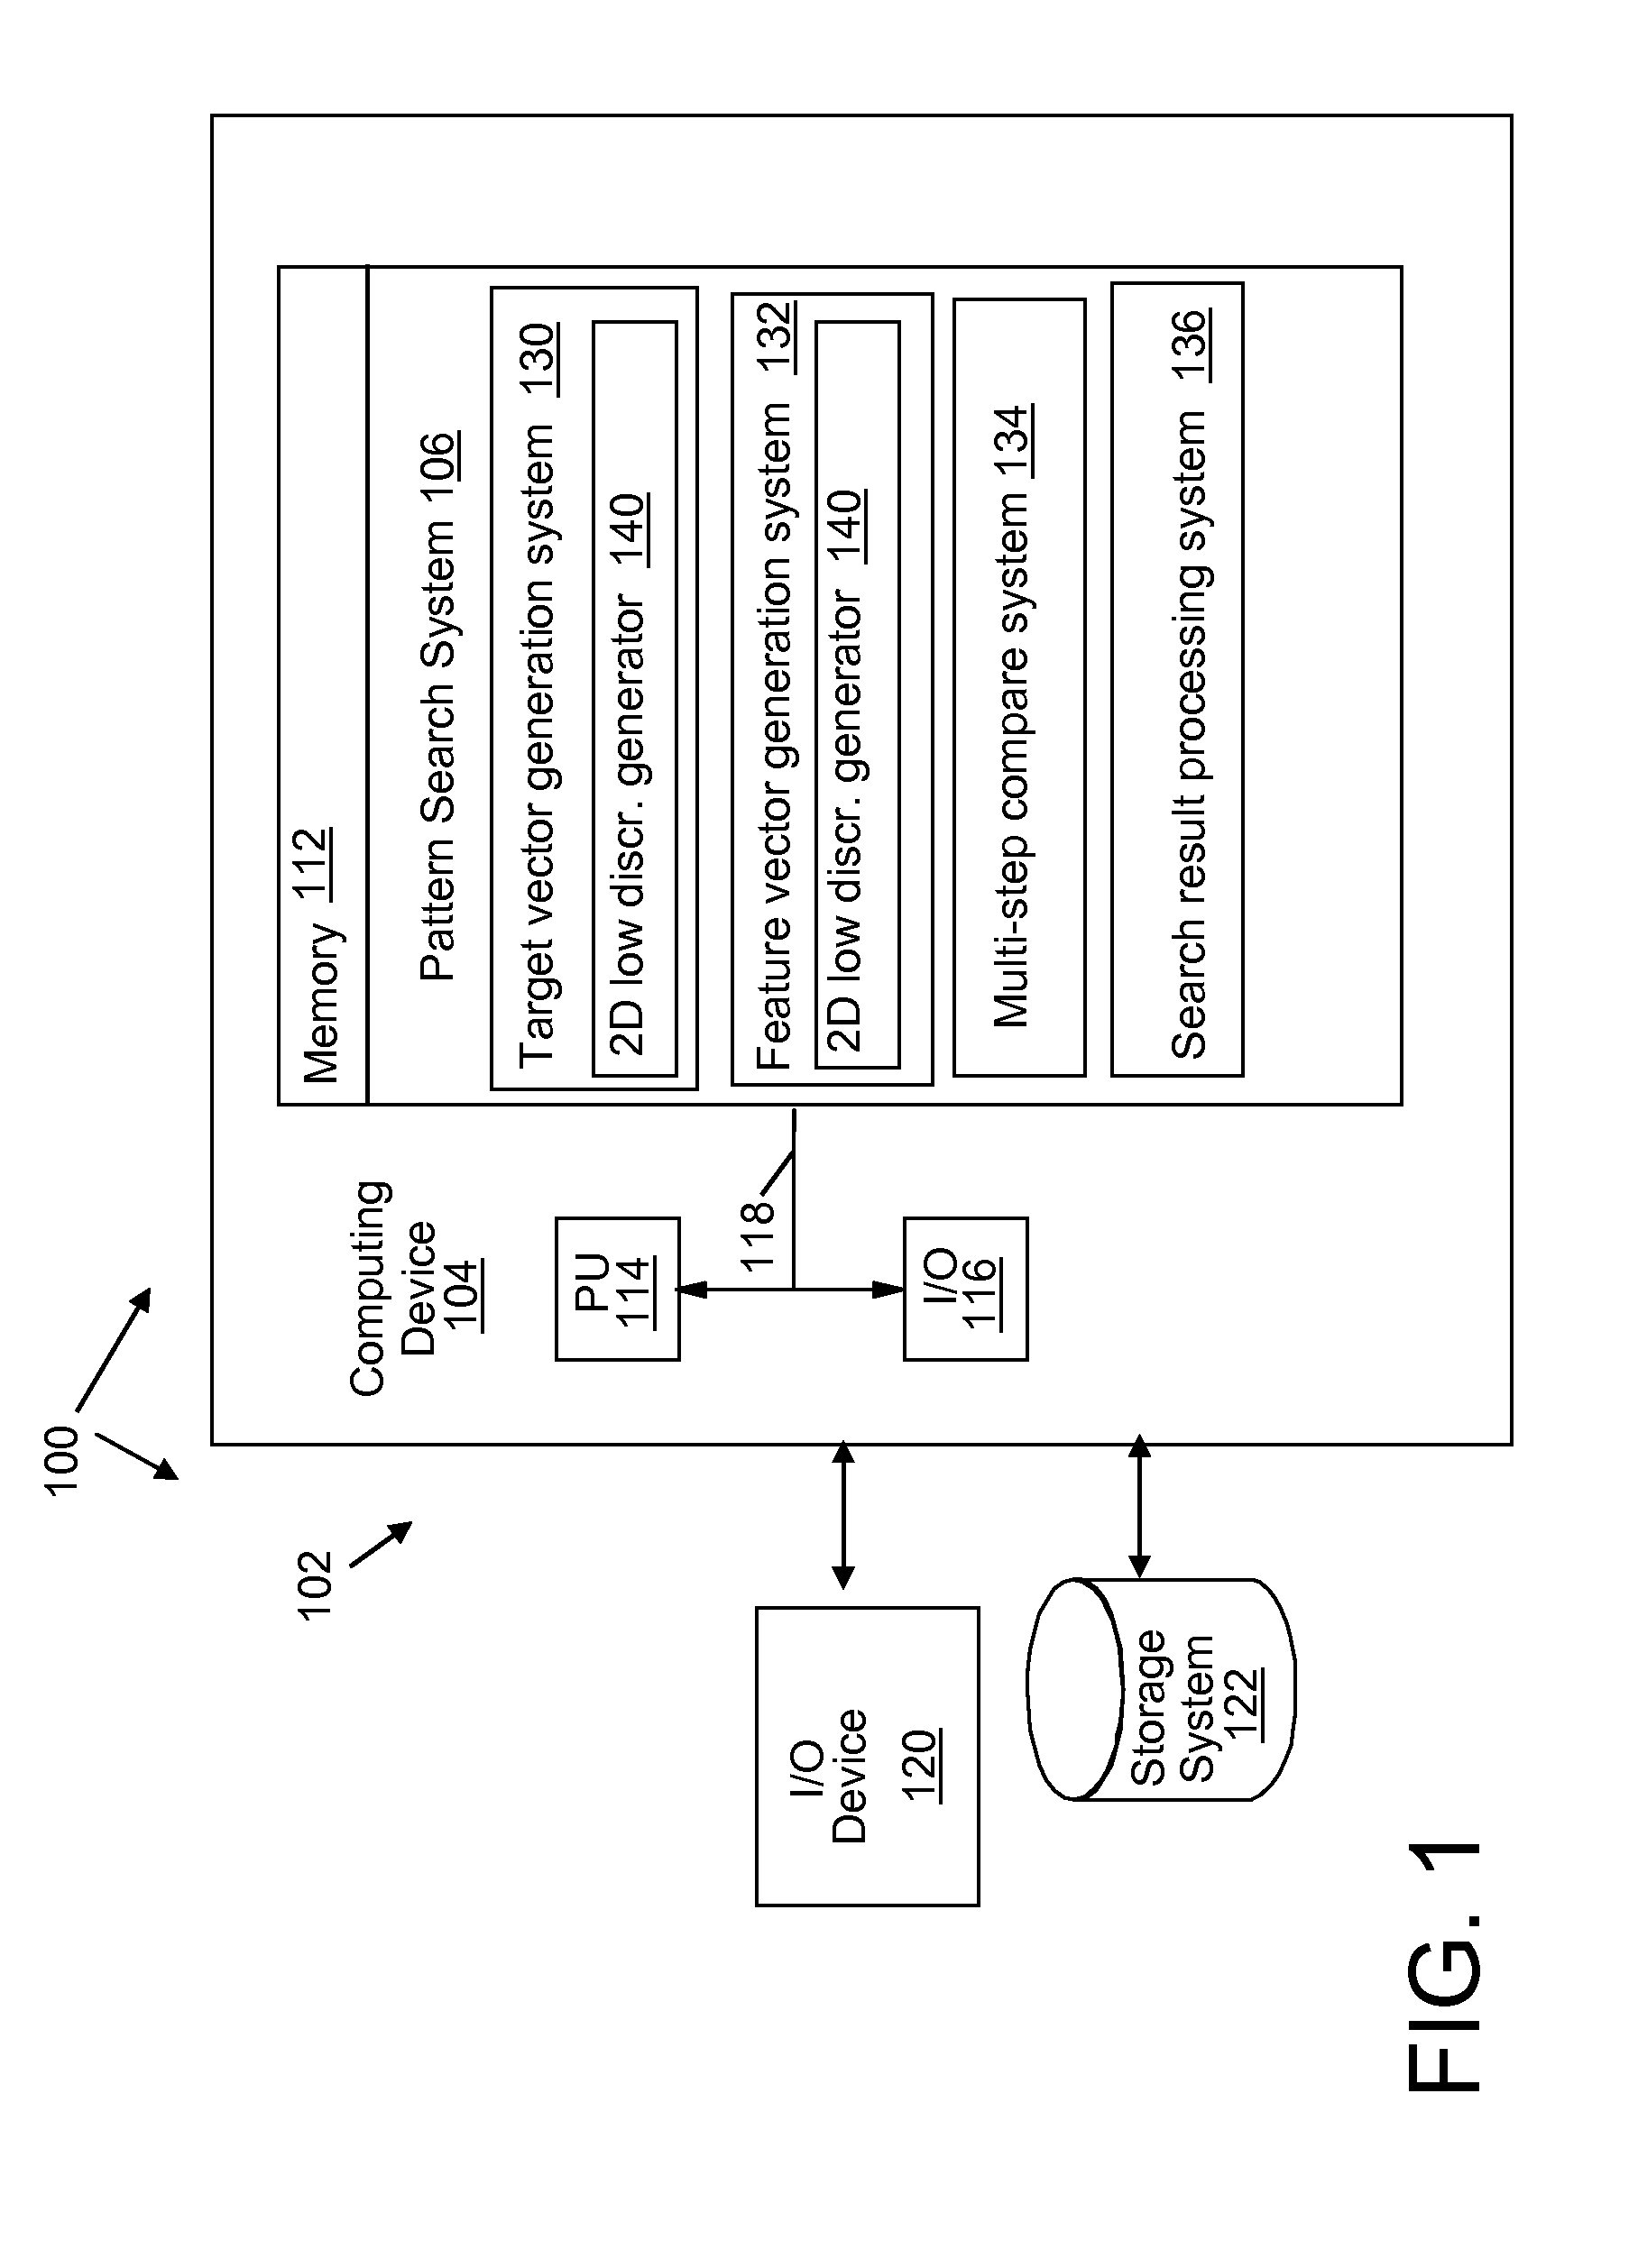 Feature extraction that supports progressively refined search and classification of patterns in a semiconductor layout